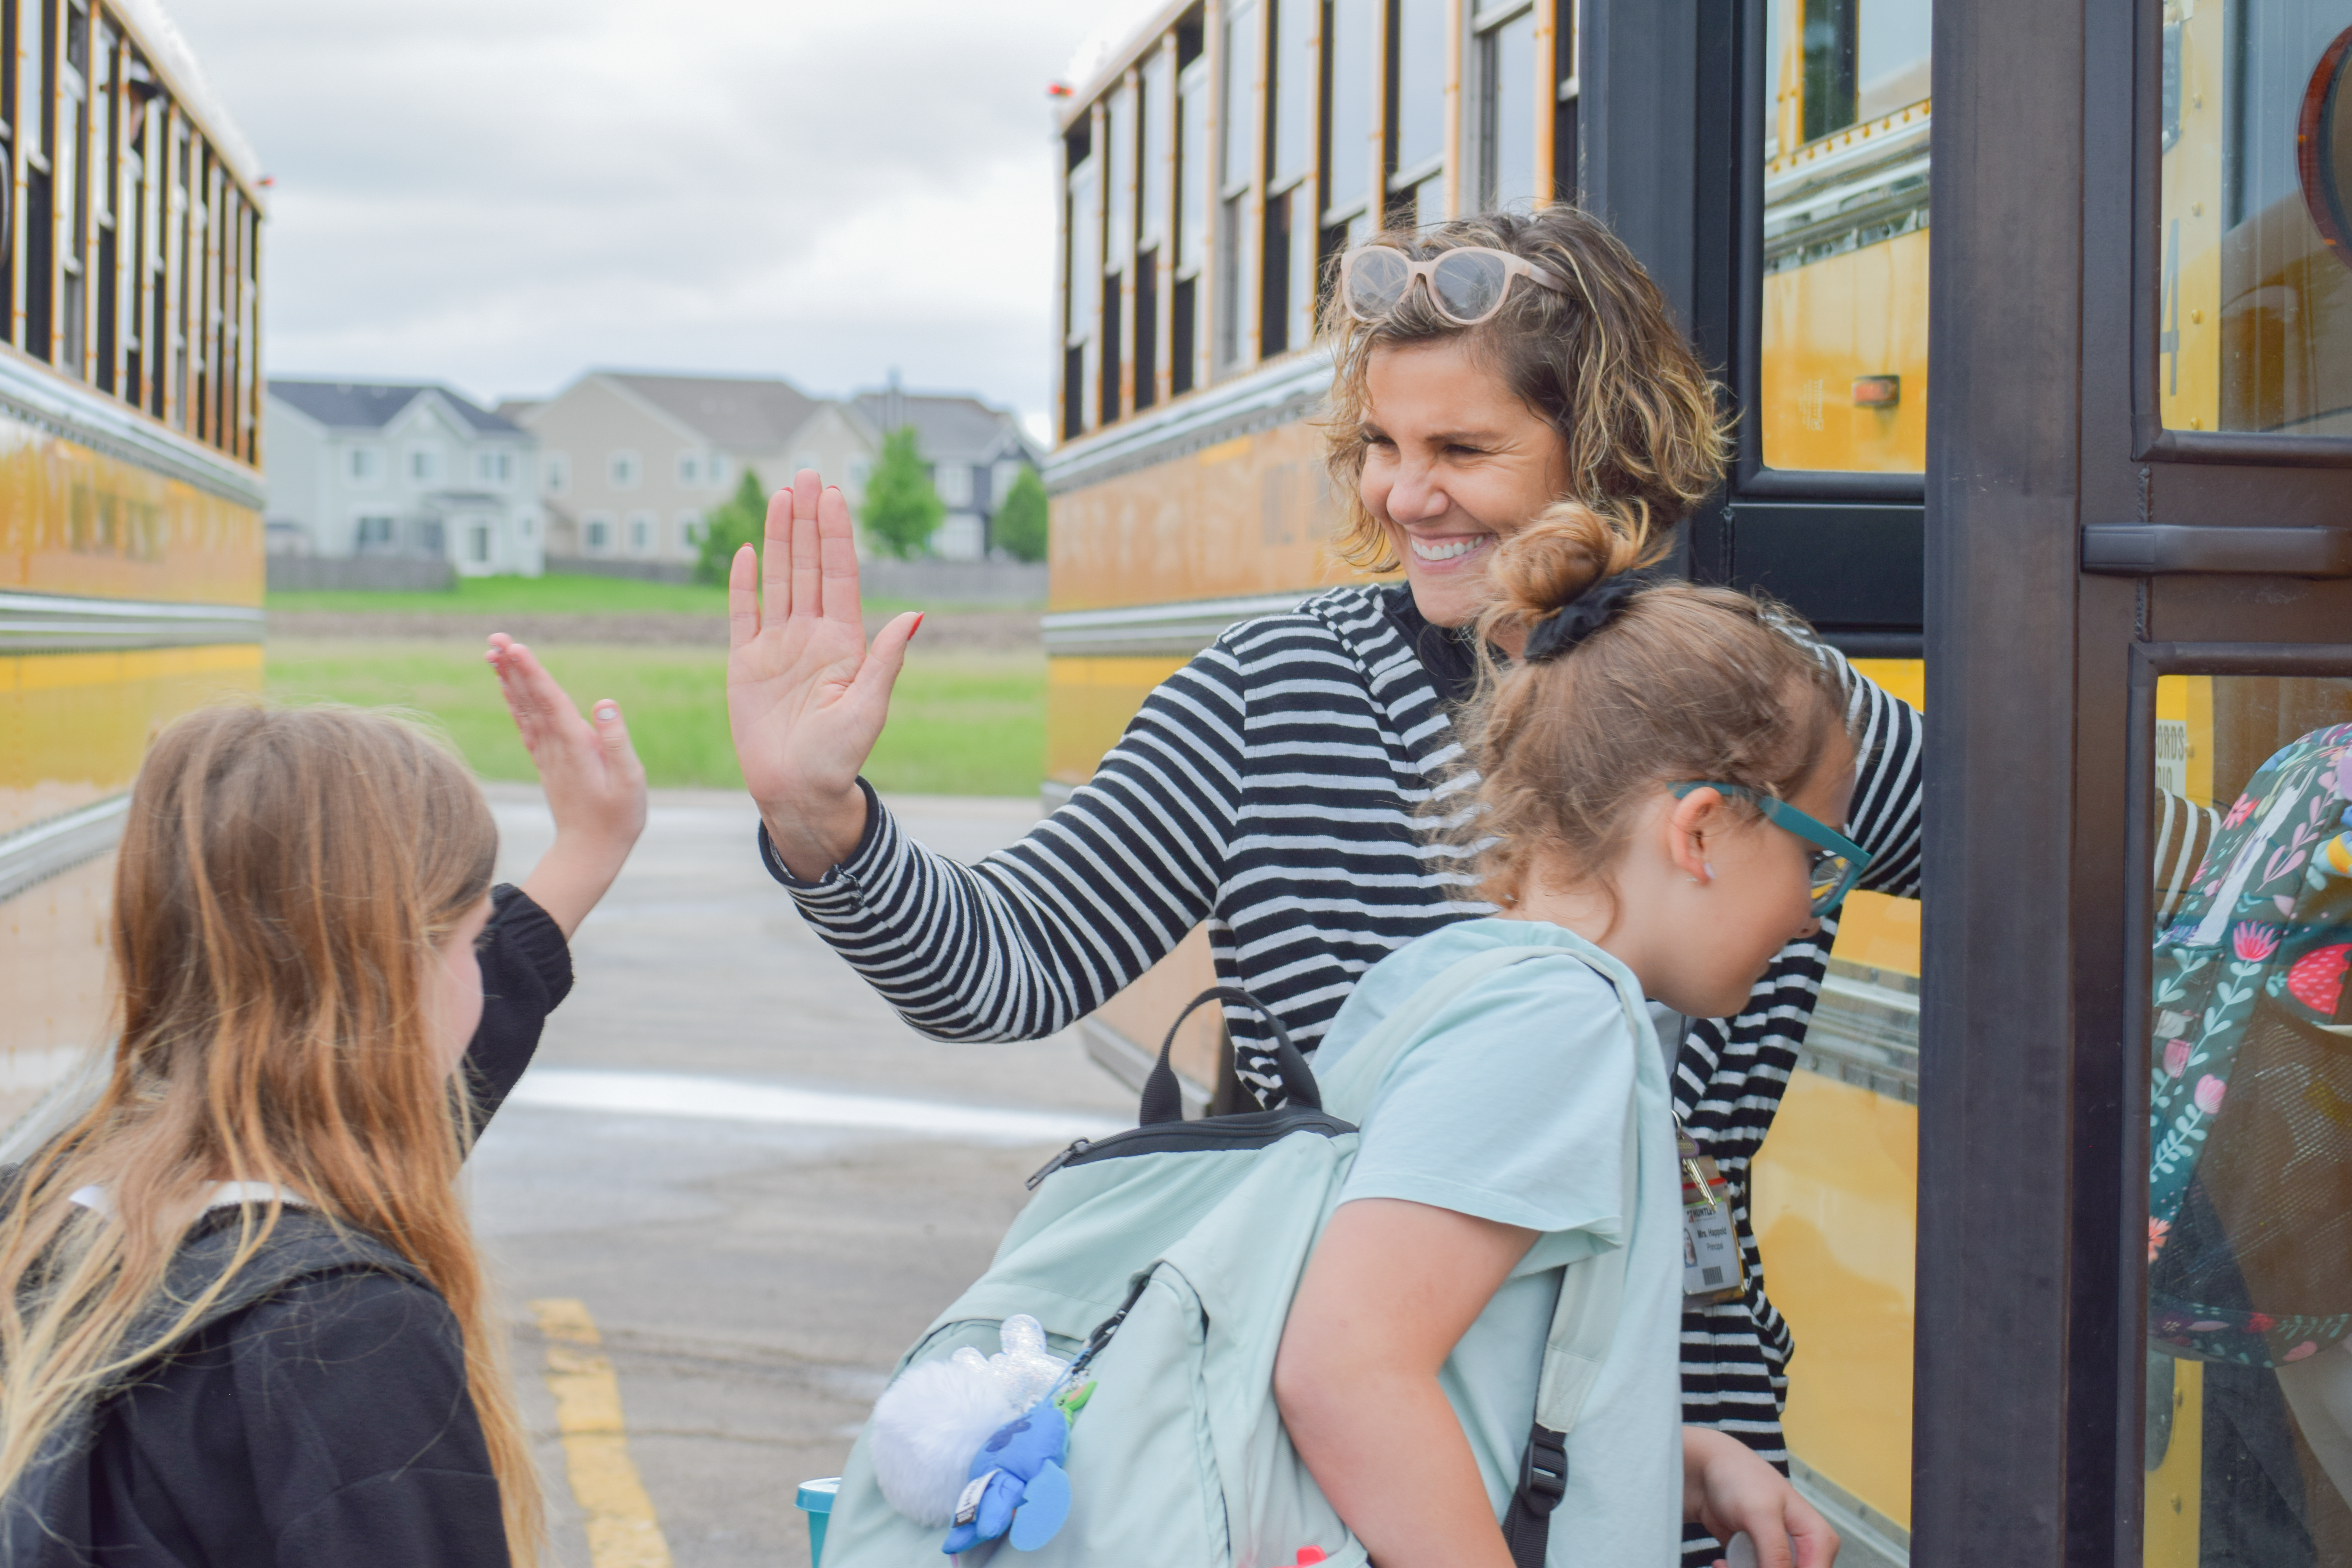 principal Michele Happold high-fiving students as they get onto the bus